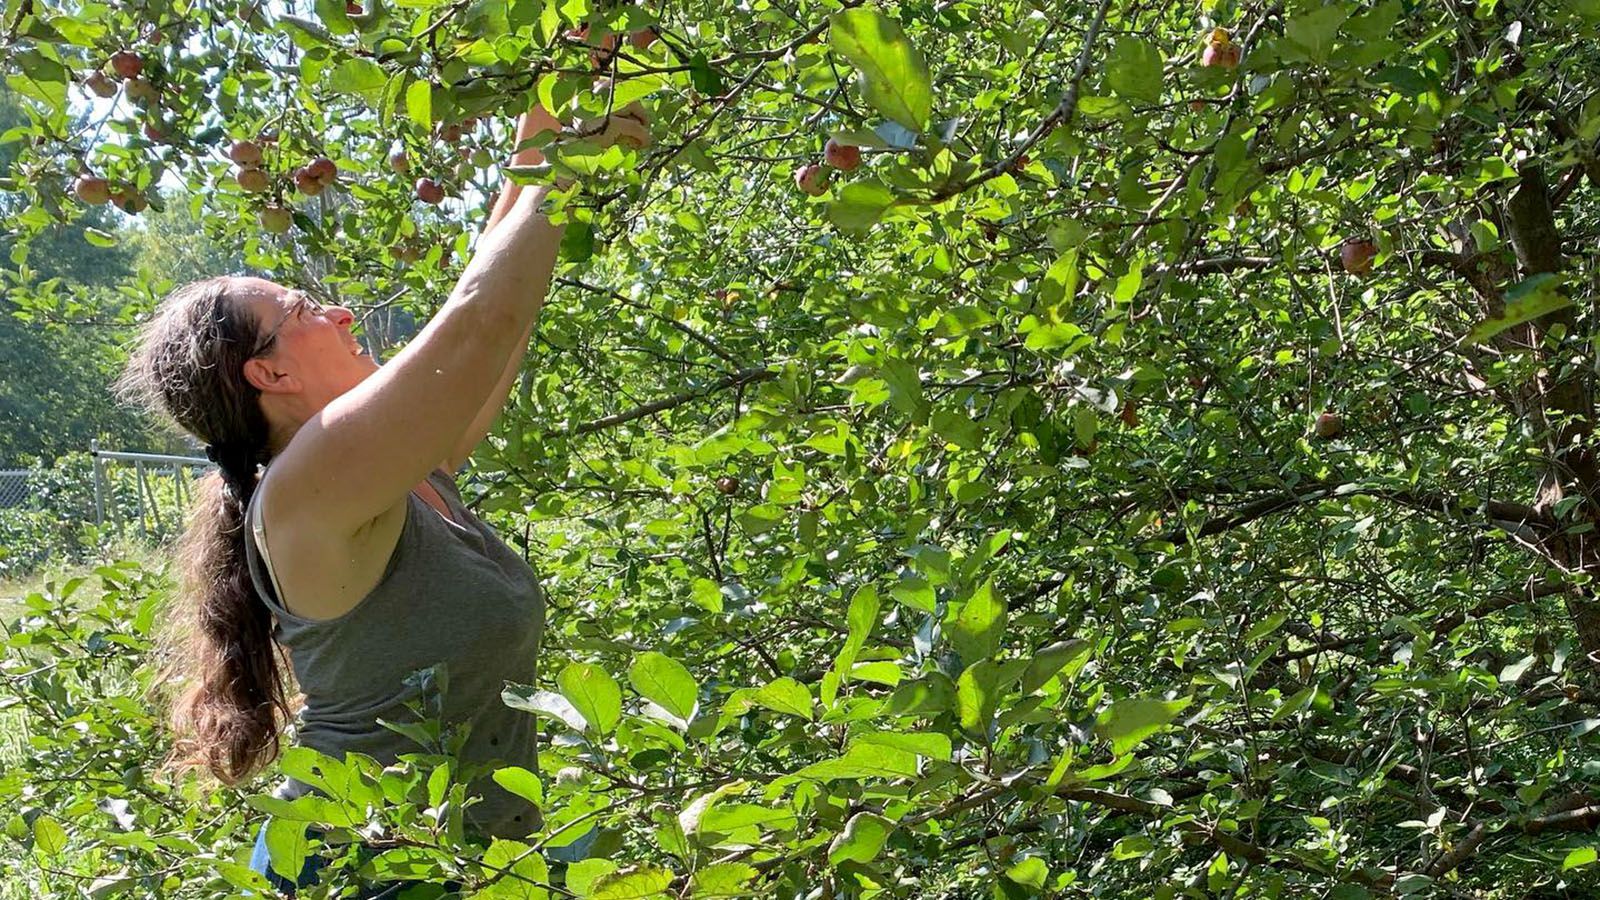 You can pick your own apples Saturday, Sept. 24, at Poplar Village Gardens.